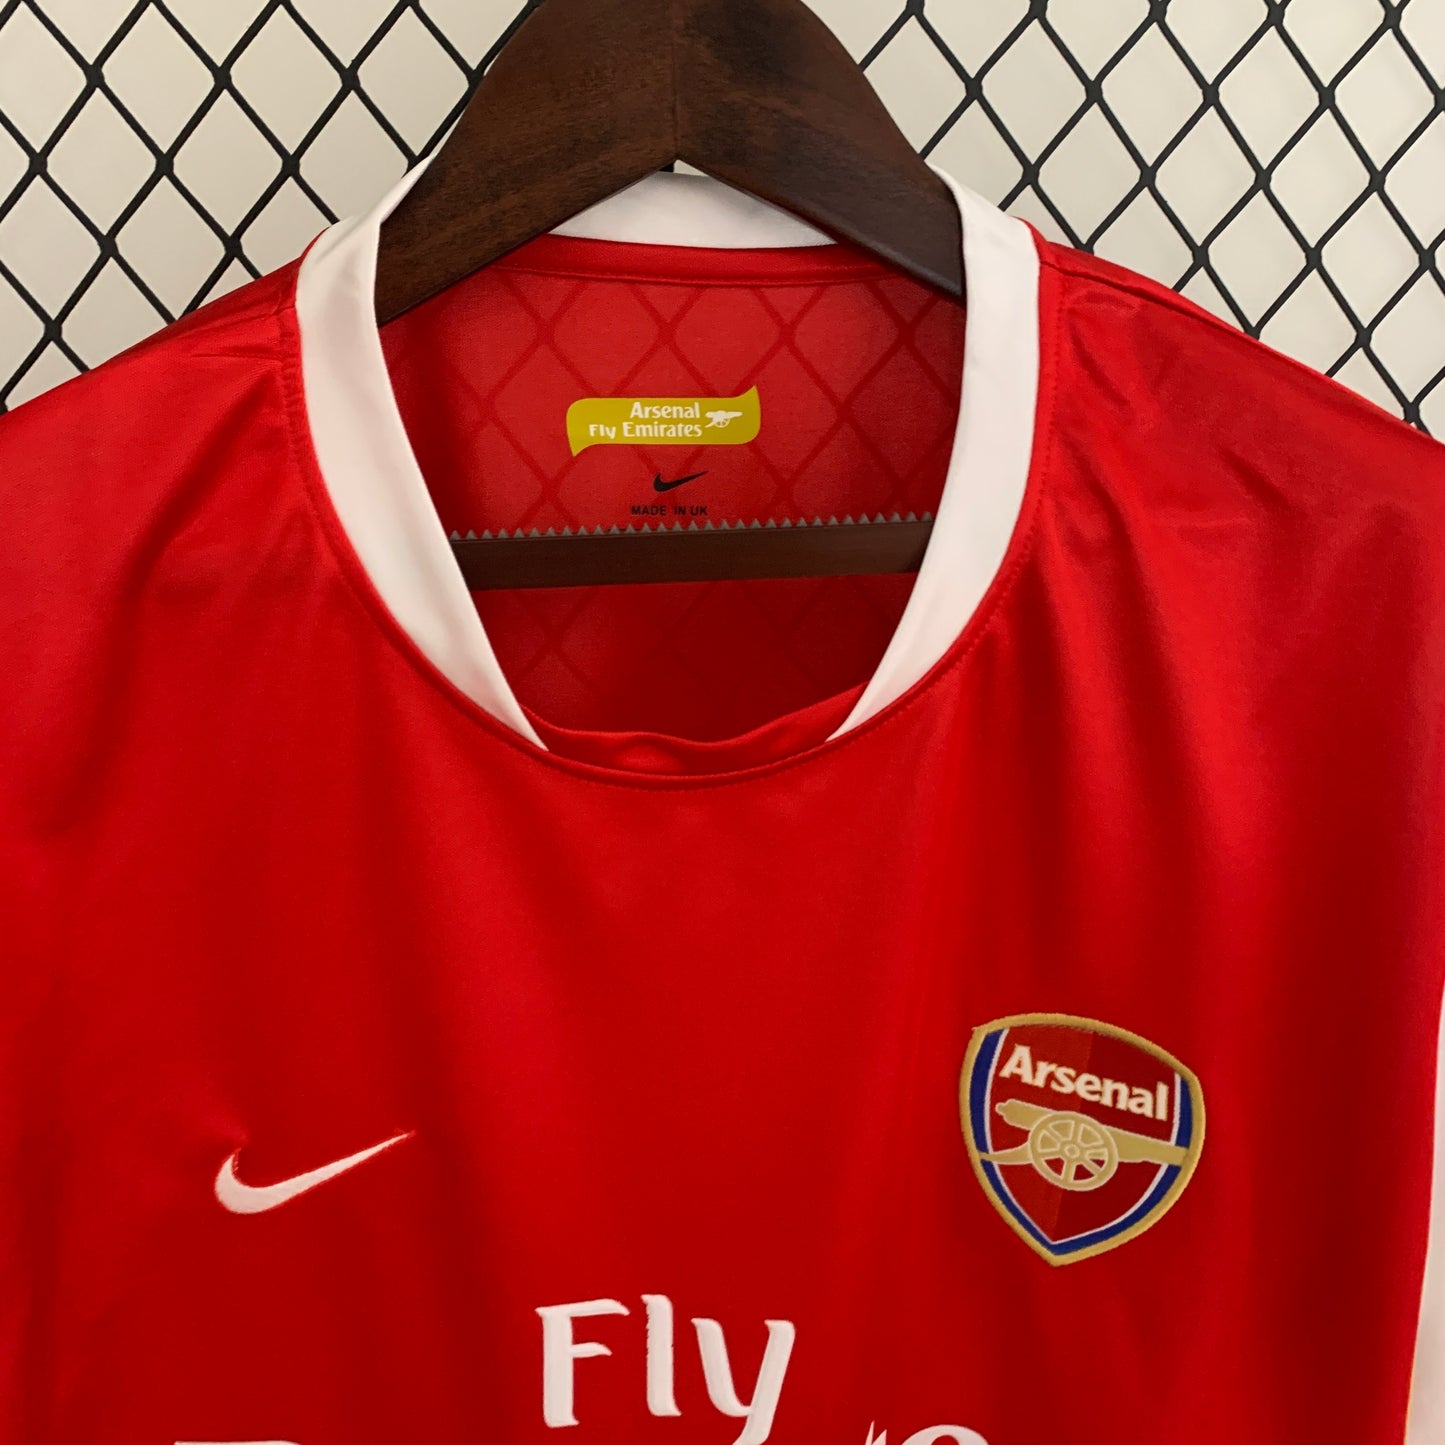 ARSENAL 2007 - 2008 HOME JERSEY